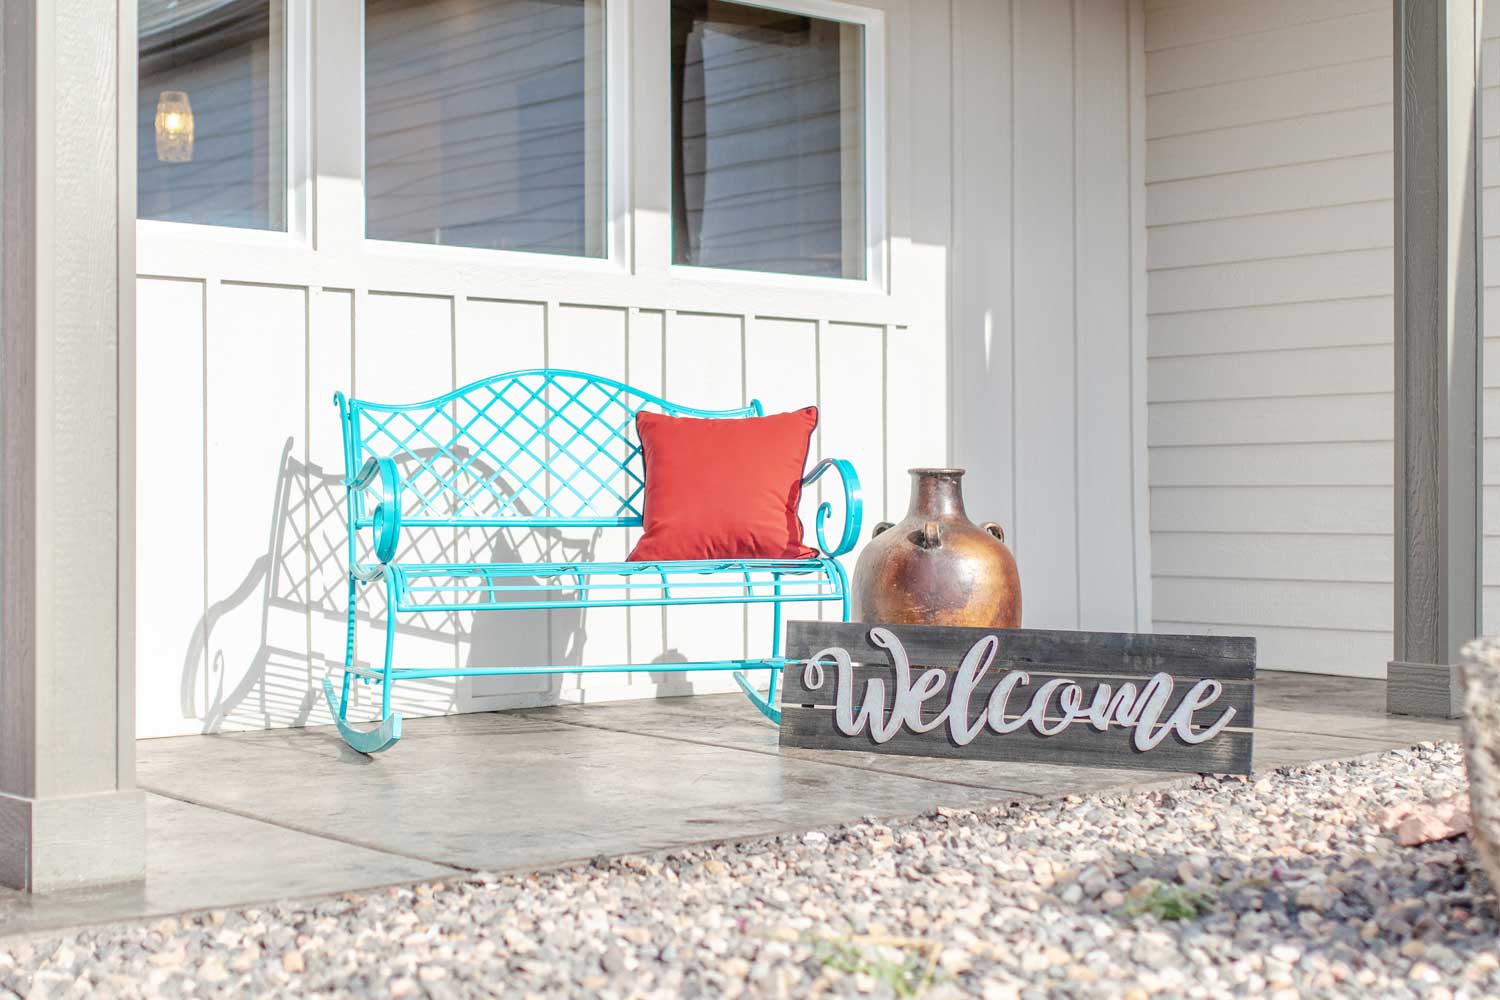 bench on the front porch with a welcome sign made of wood